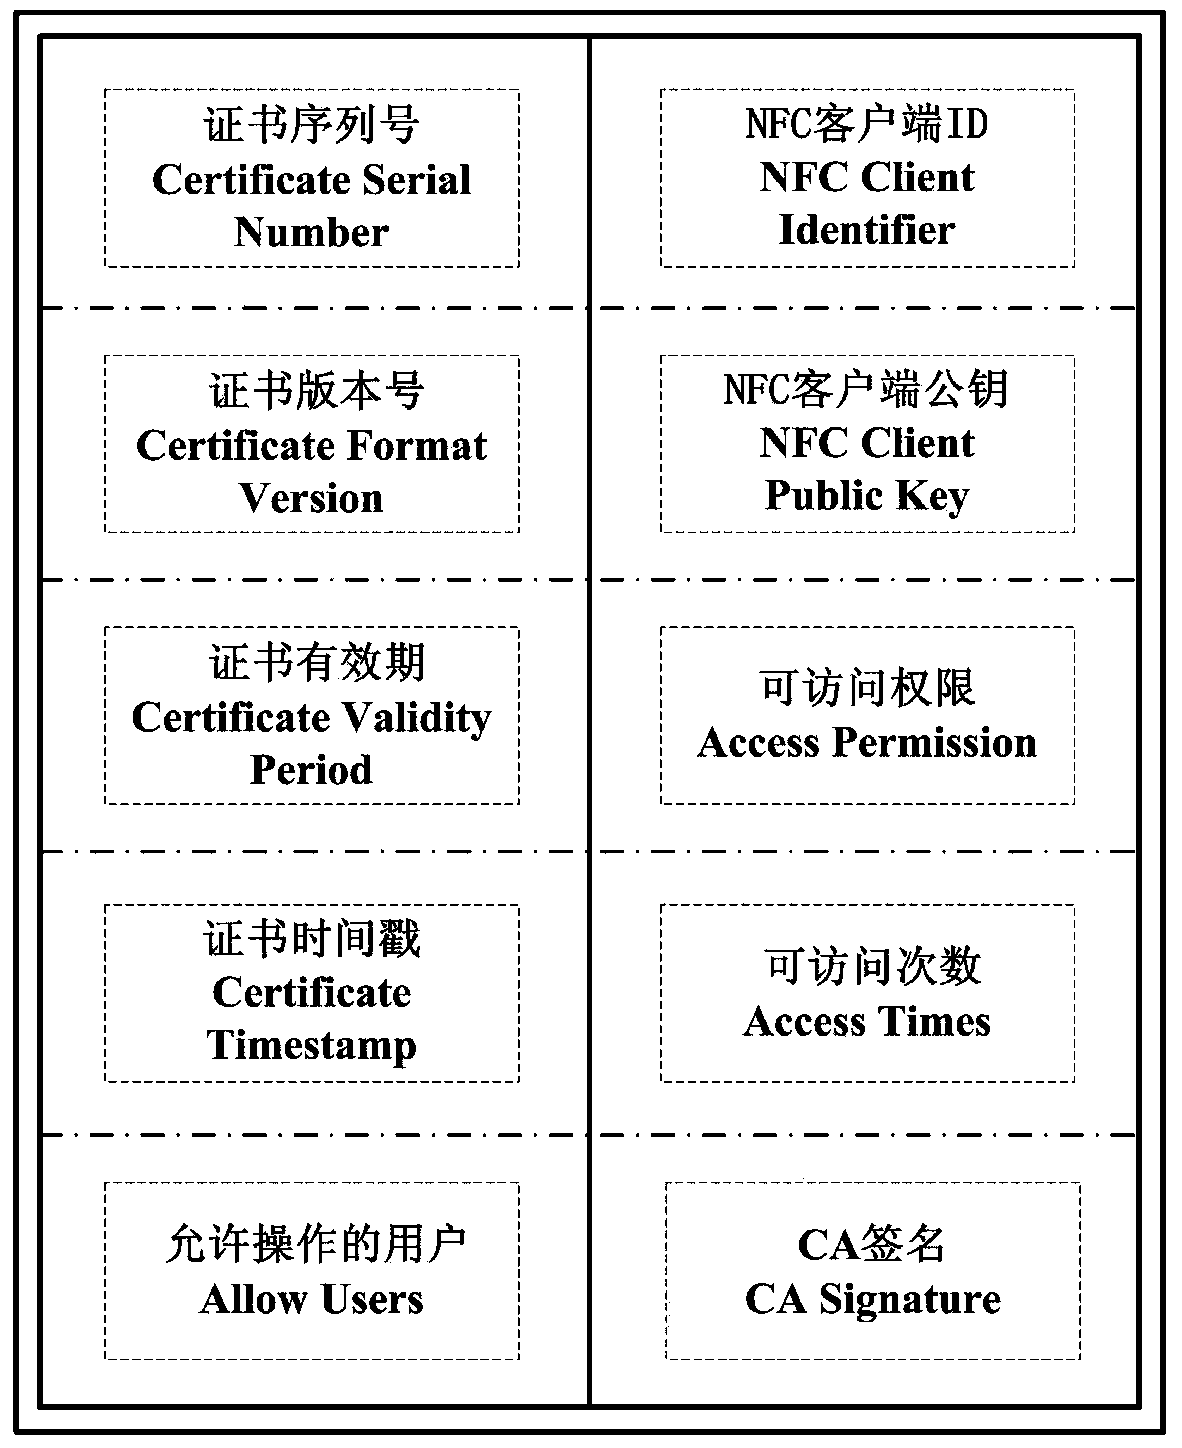 NFC (near field communication)-based point-to-point trusted authentication method